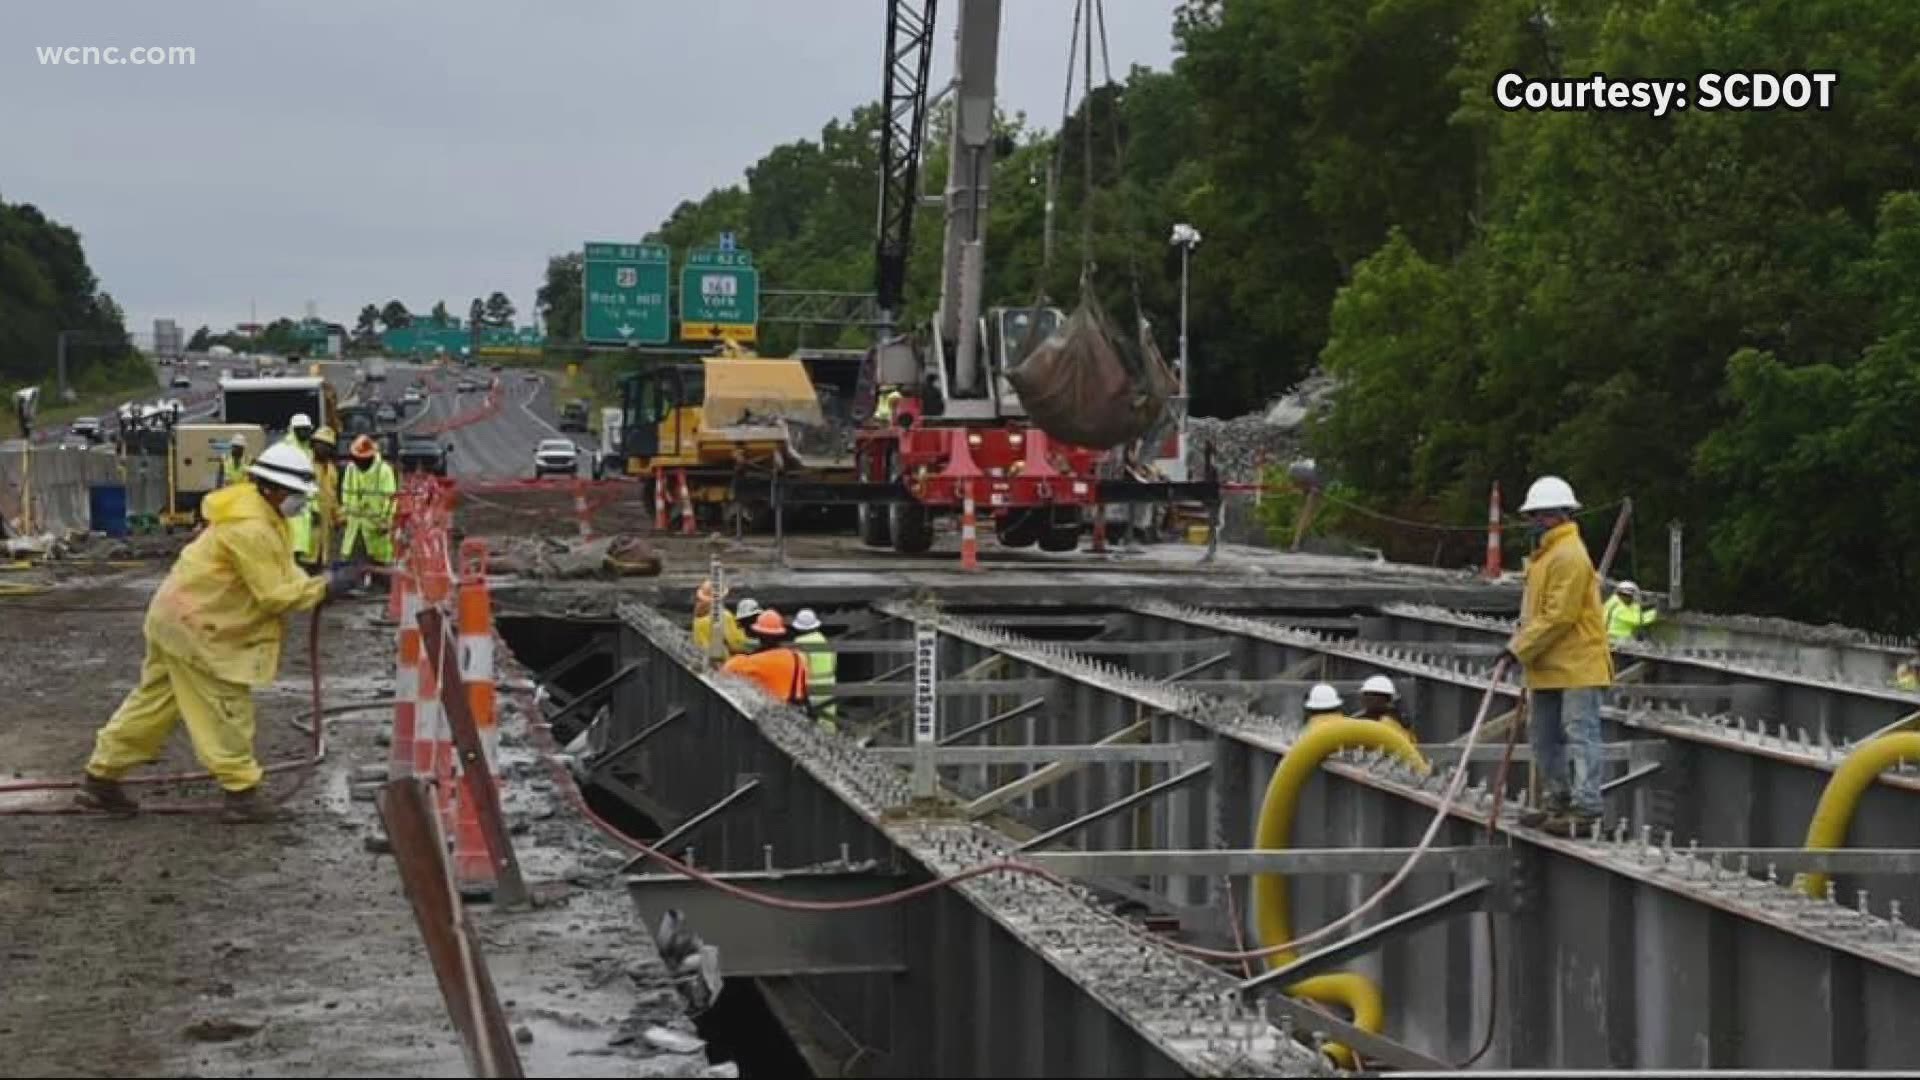 We're officially 1 week into the Catawba River Bridge construction on I-77 in Rock Hill. The project is ahead of schedule with a goal of being done by Memorial Day.